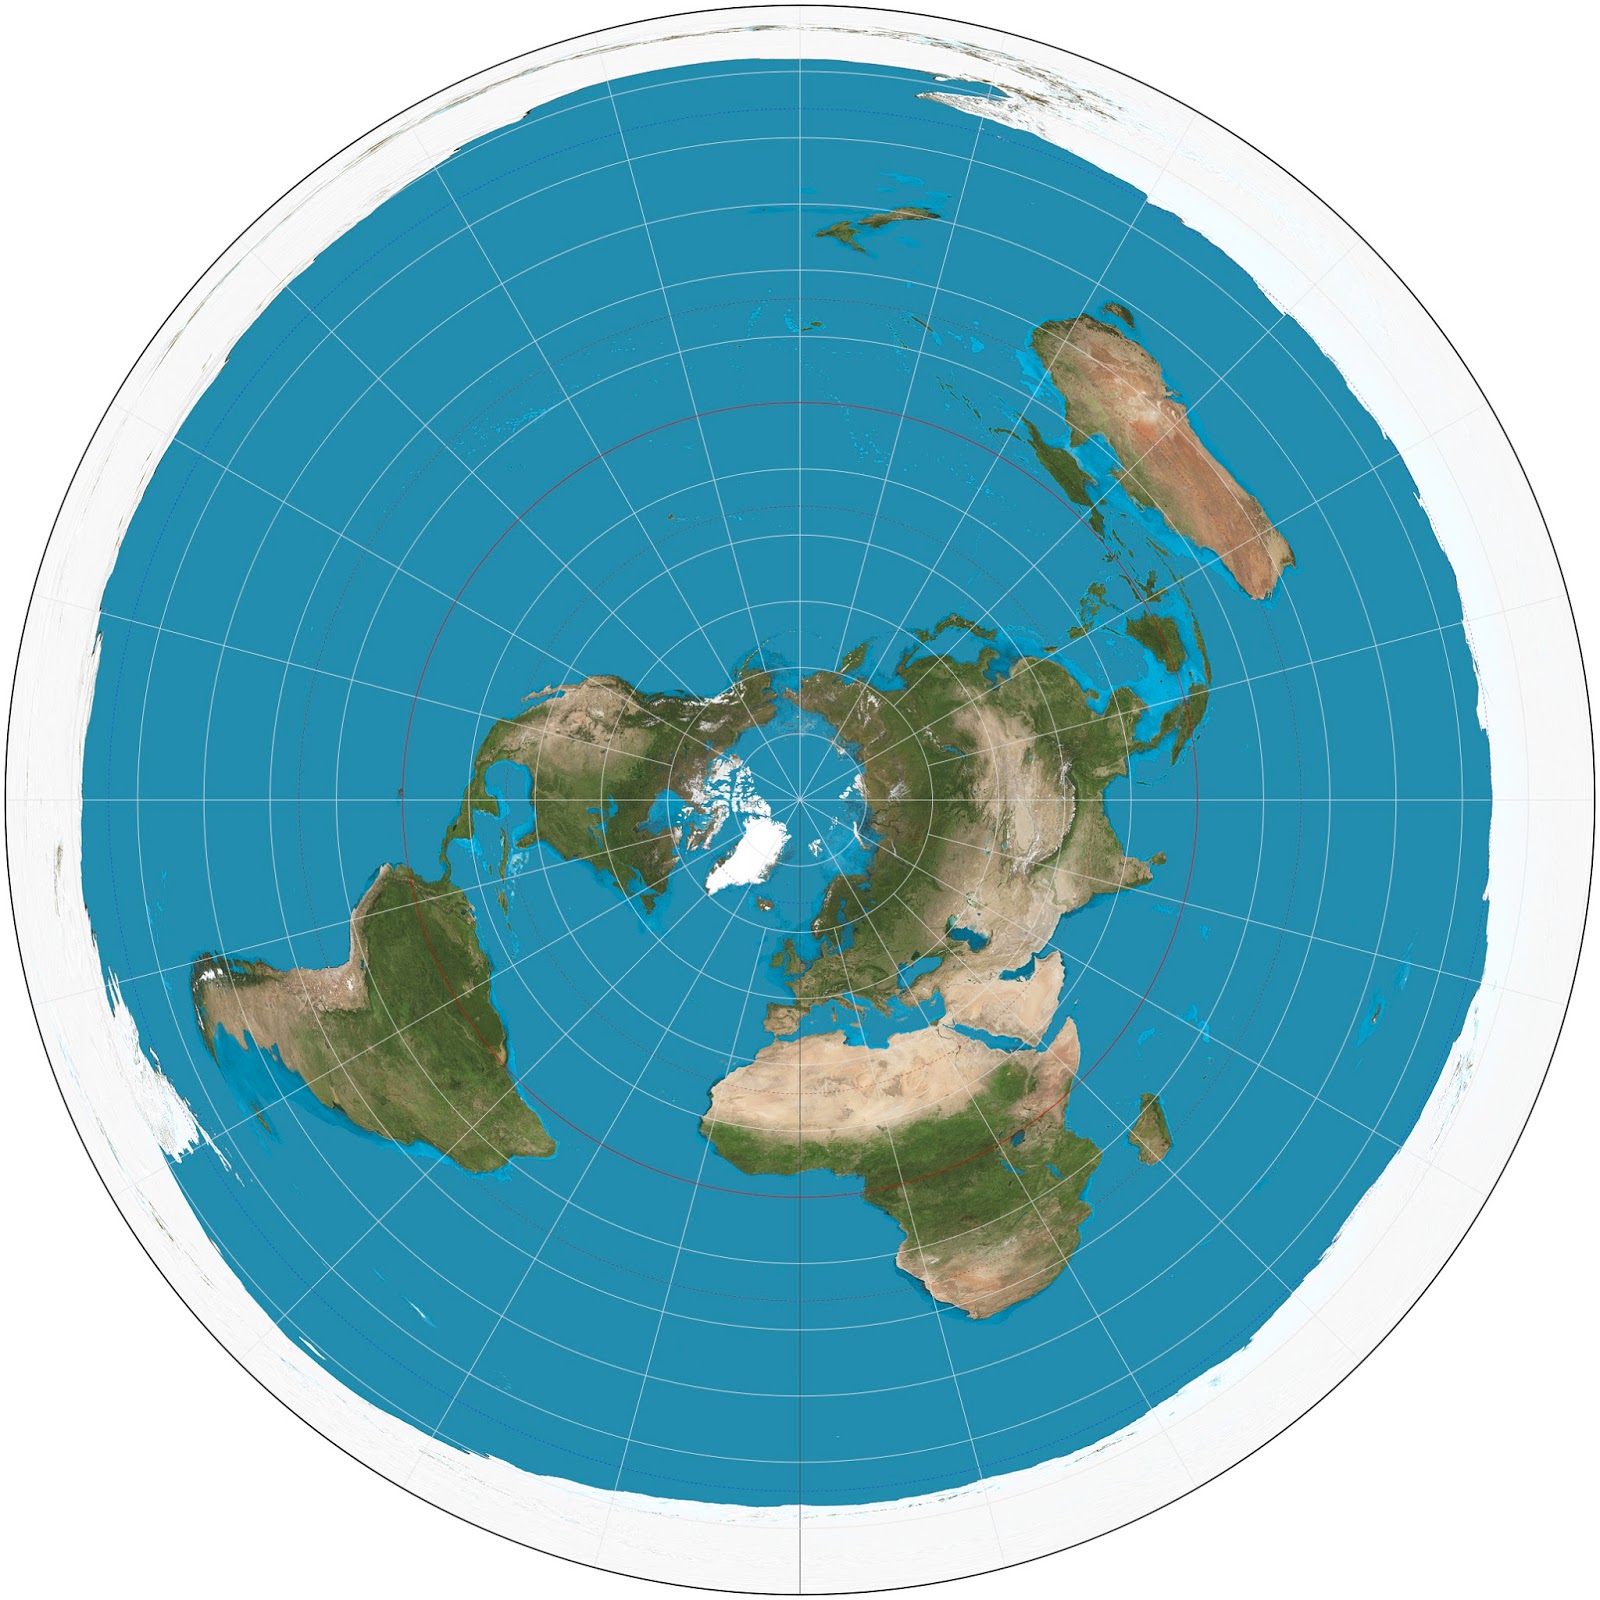 Azimuthal%2BEquidistant%2BProjection.jpg